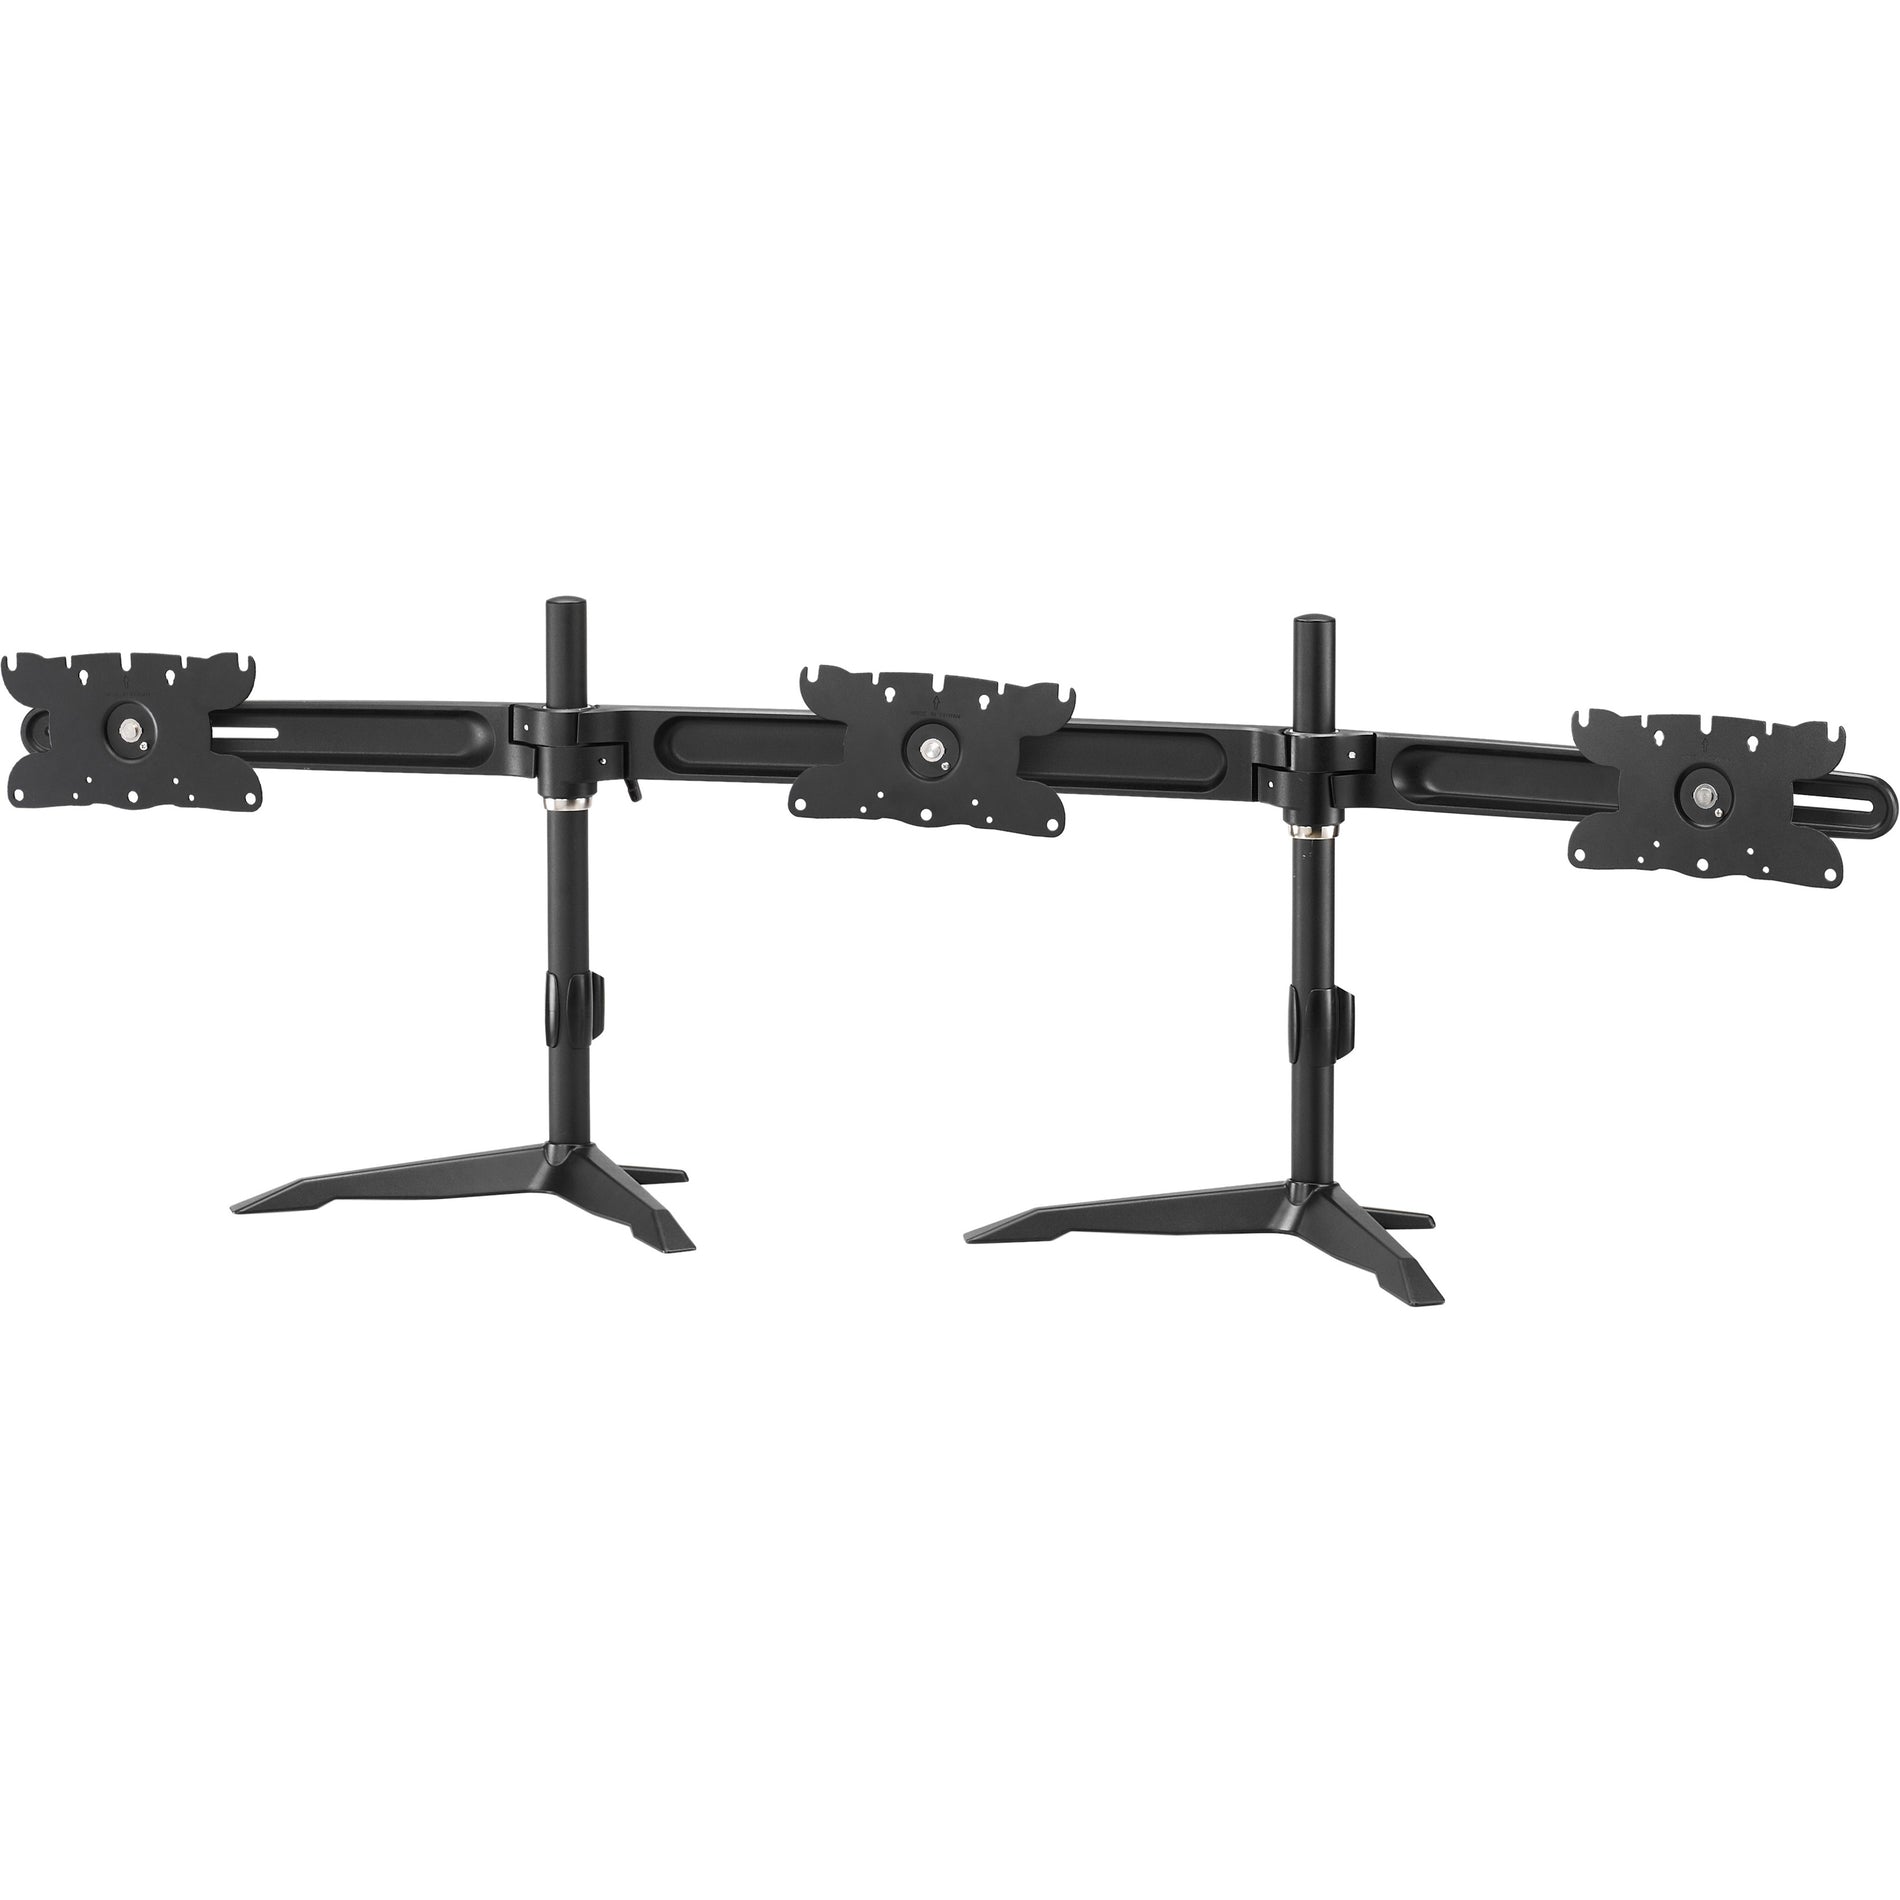 Amer AMR3S32 Display Stand, Rugged, Swivel, Tilt, 360° Rotation, 66.14 lb Maximum Load Capacity, 32" Screen Size Supported